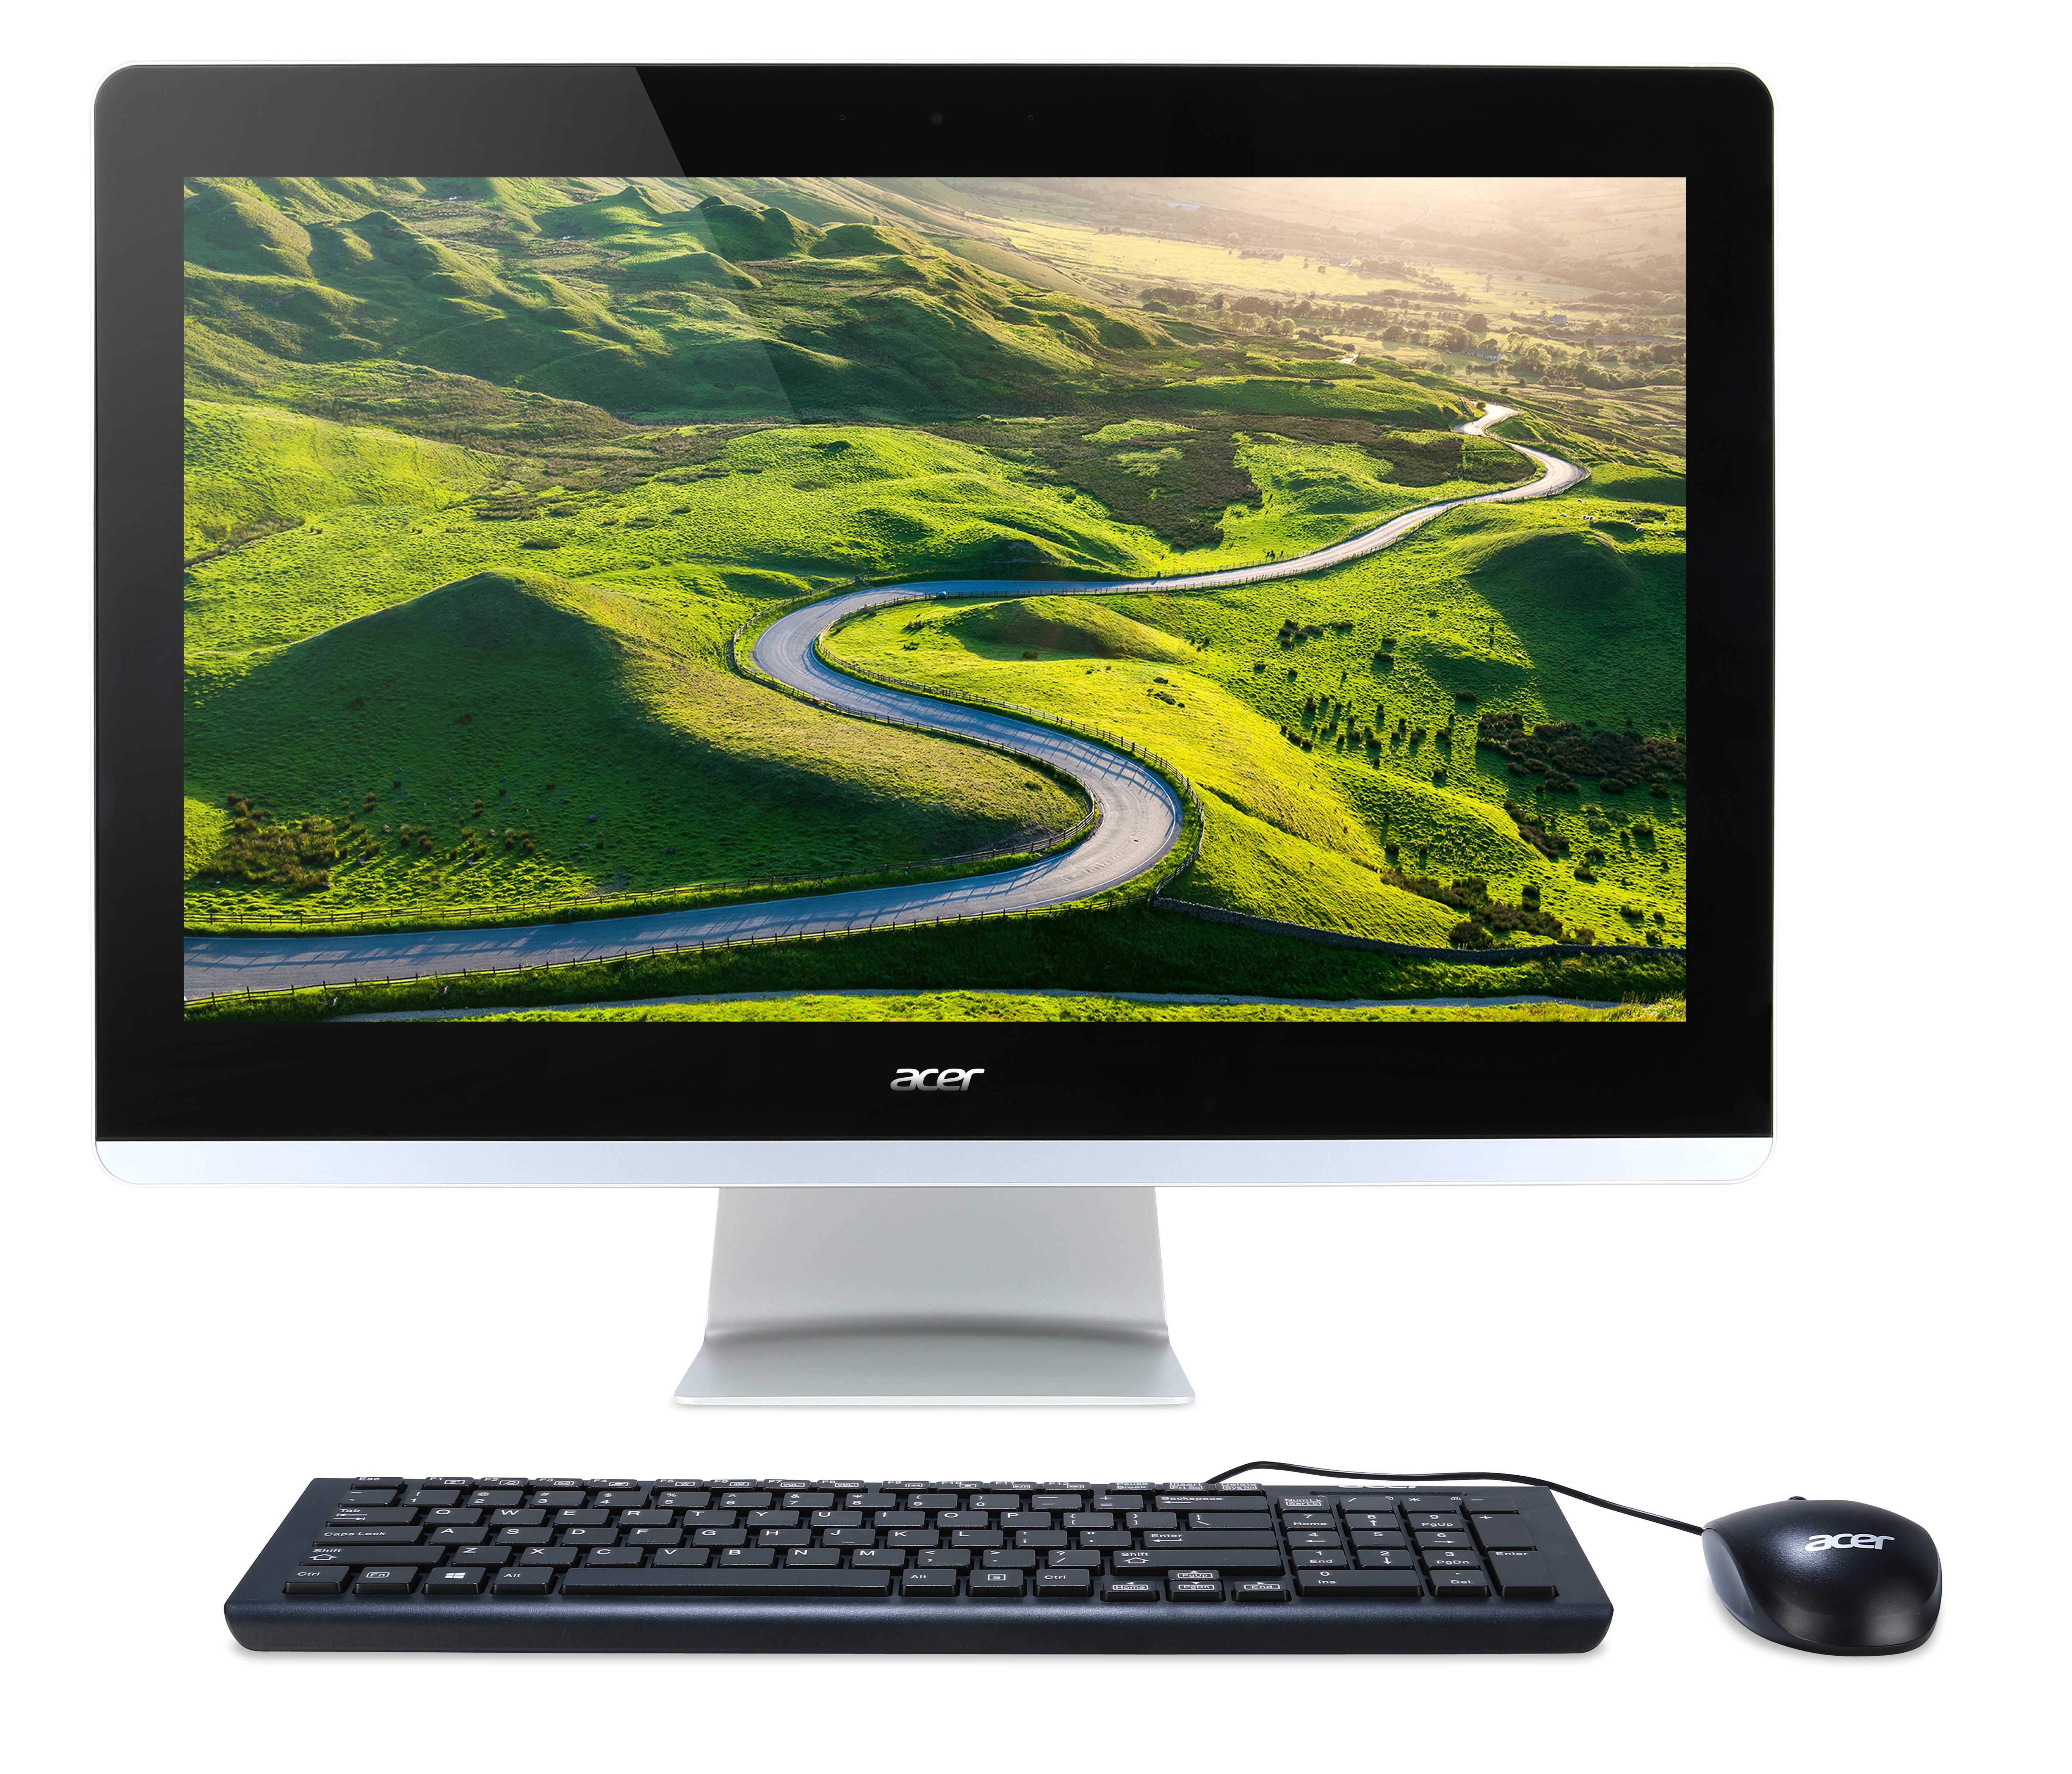 All In One Acer Az3-705-Mb11 21.5", Core I3-5005U, 4Gb, 1Tb, W10 Home